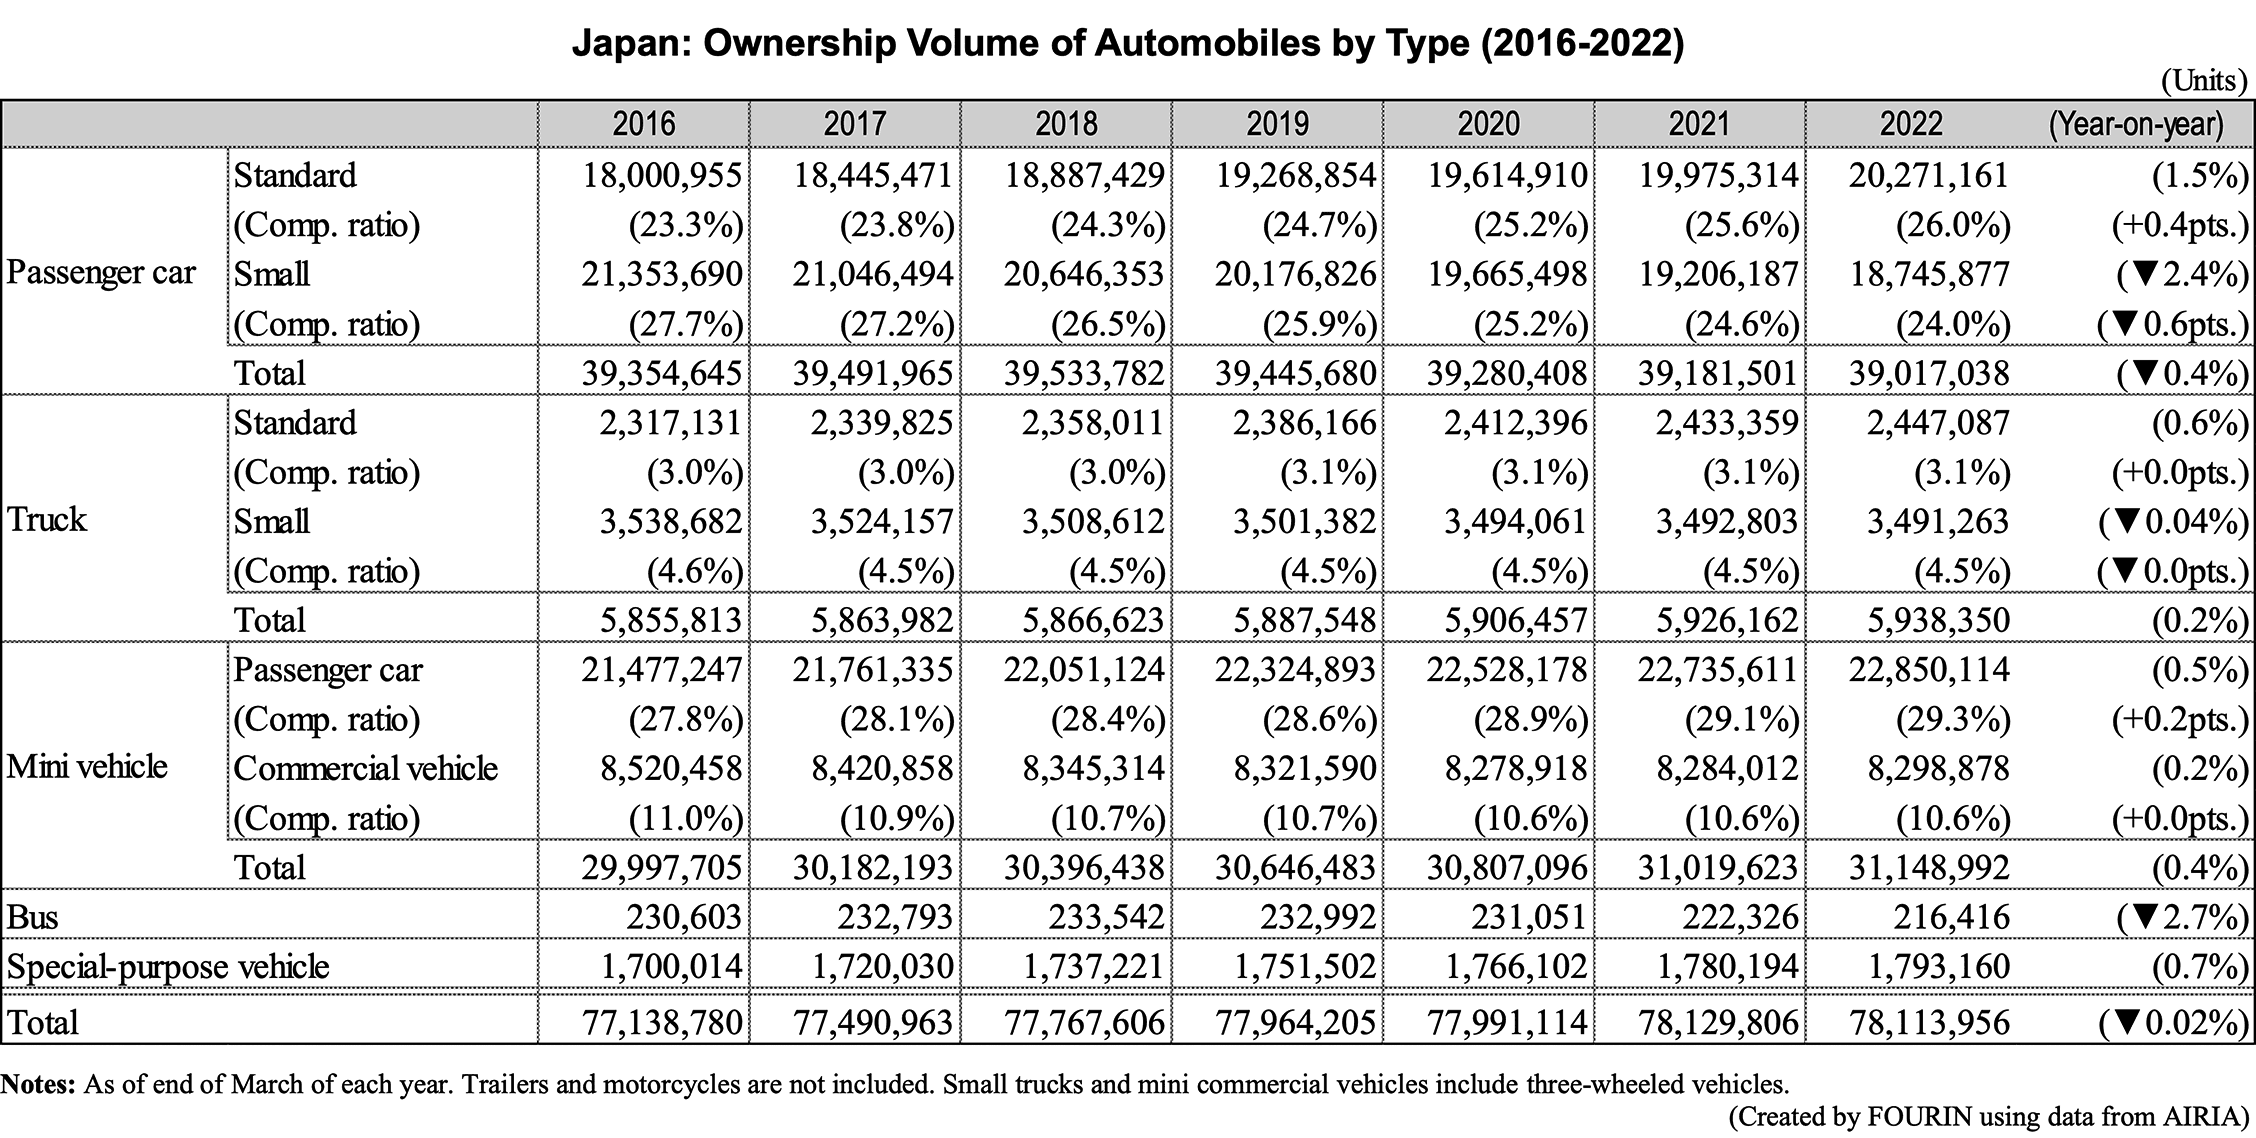 Table data: Japan: Ownership Volume of Automobiles by Type (2016-2022)